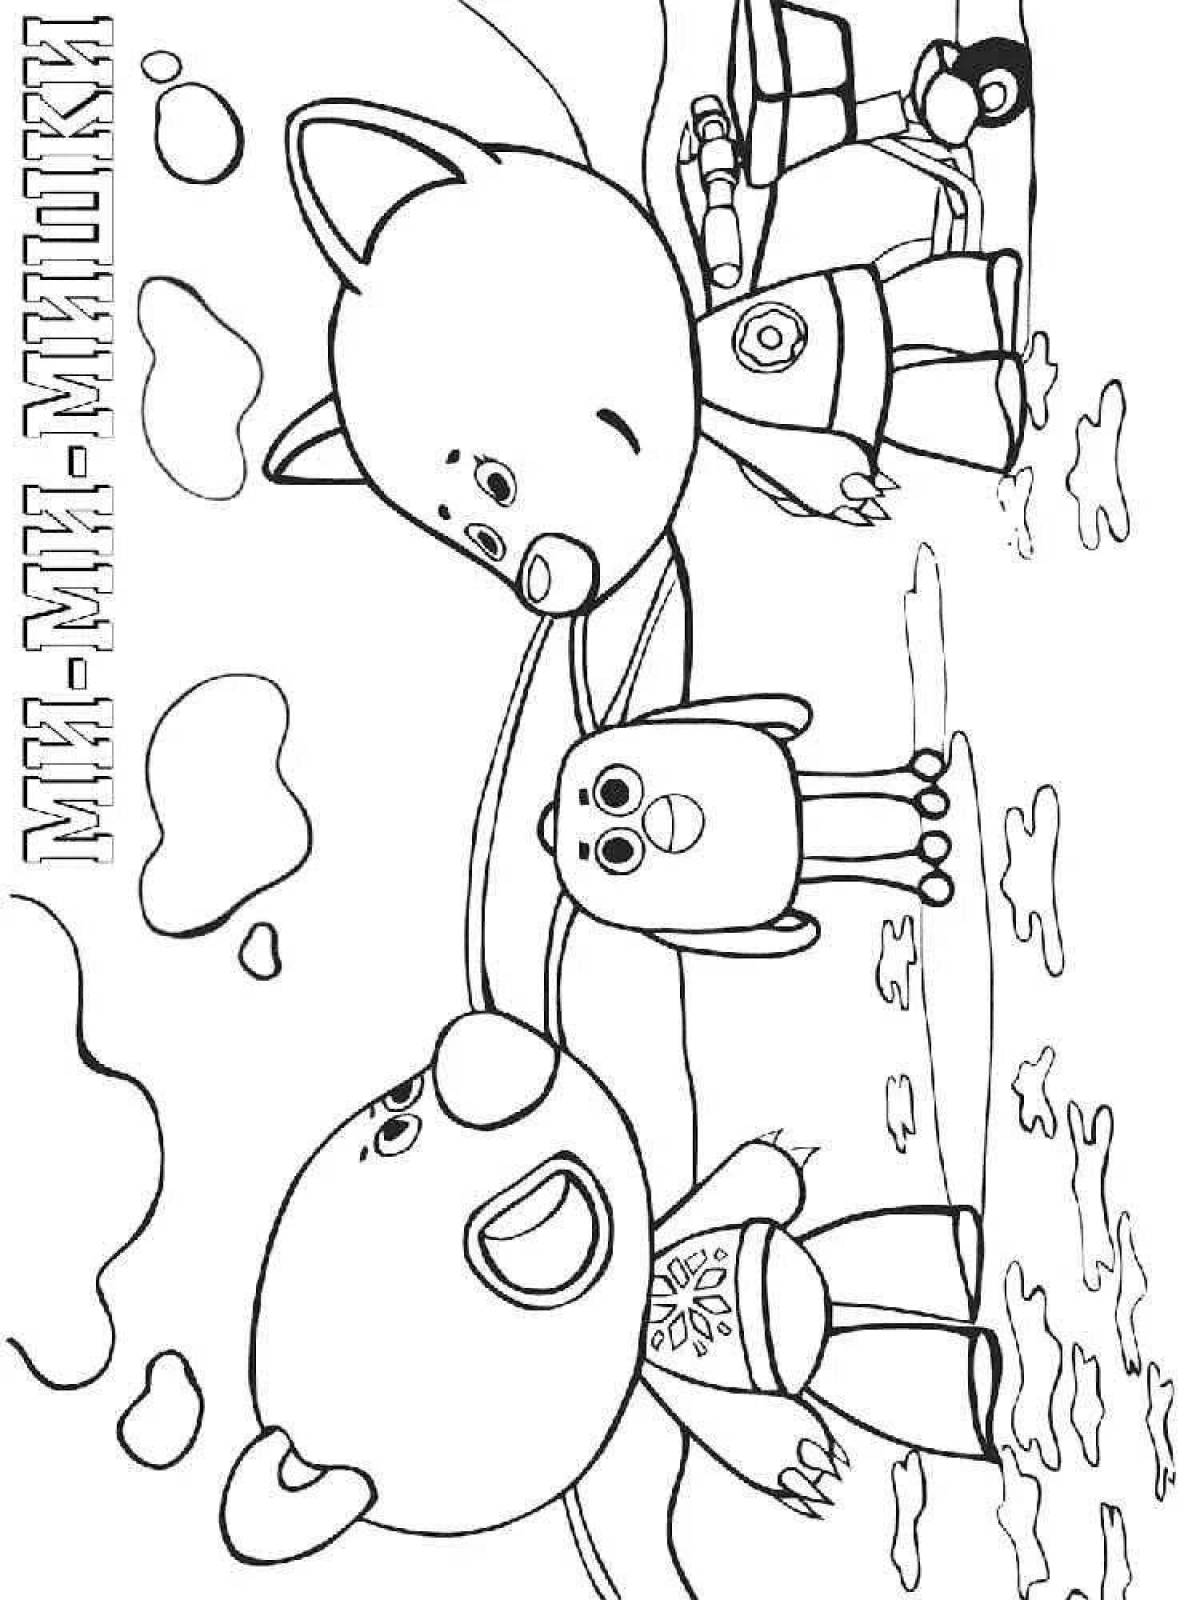 Amazing teddy bear coloring pages for kids